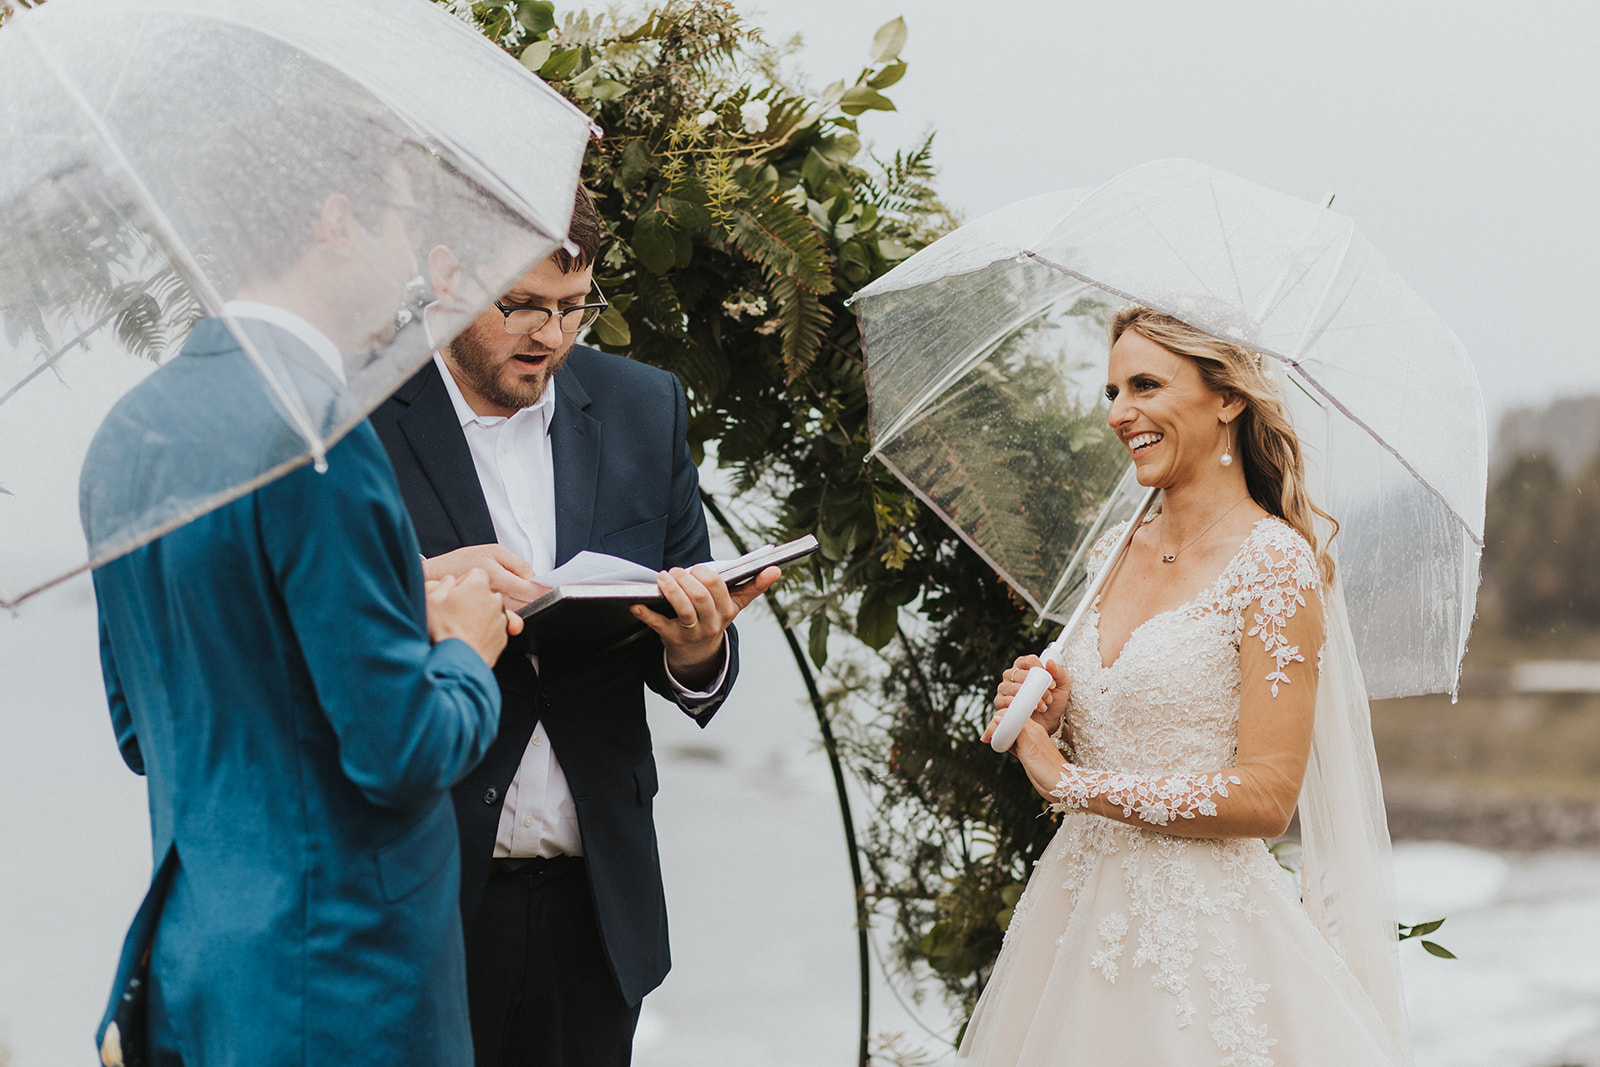 Why You Should Hire an Officiant for Your Elopement – Oregon Officiant